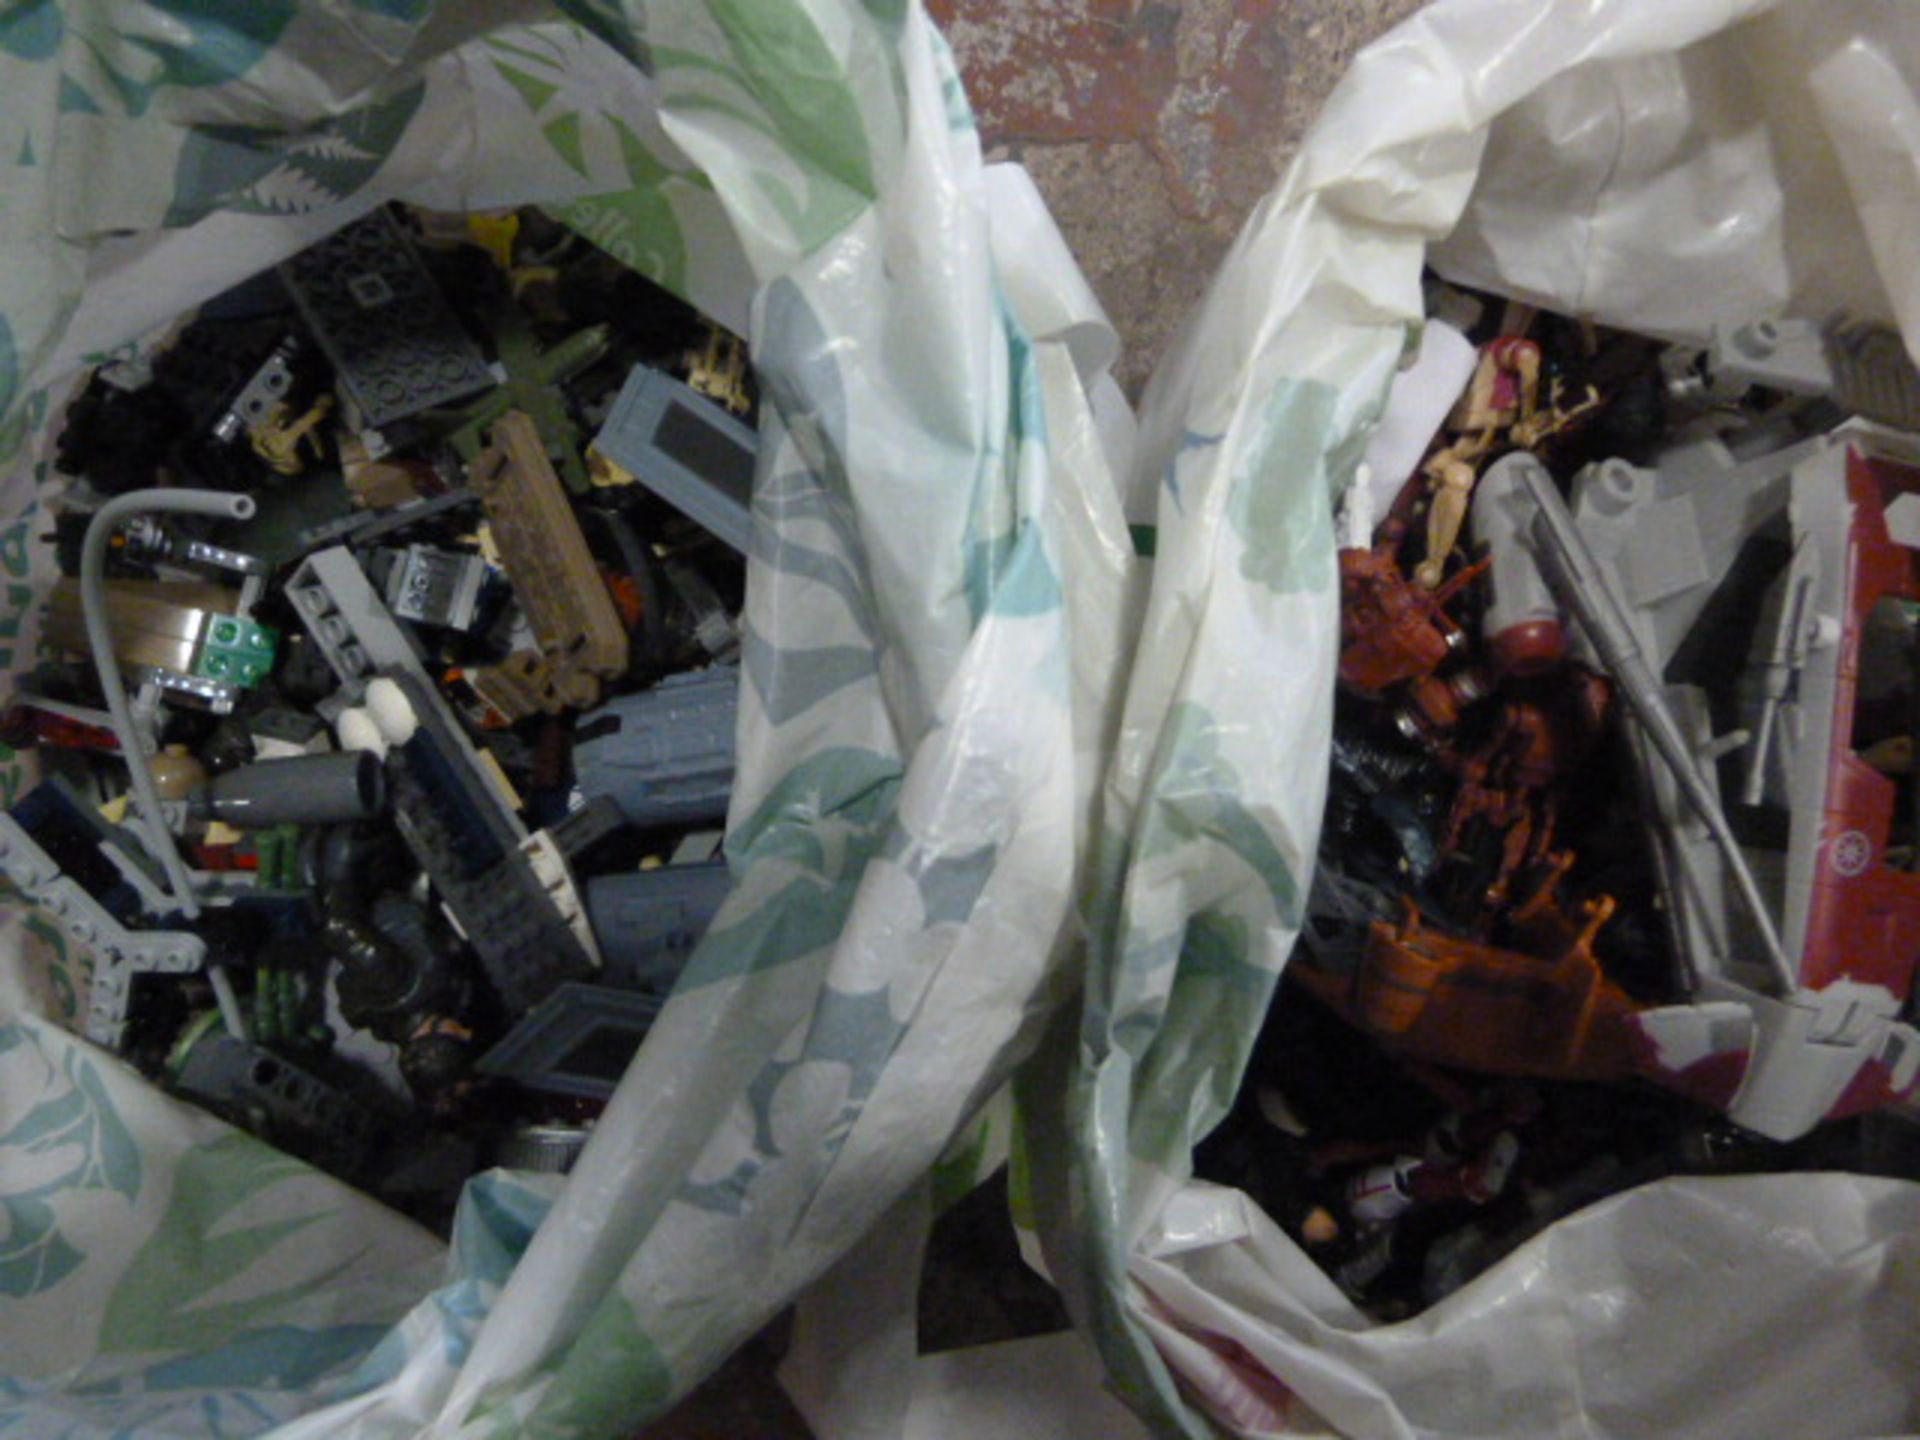 Two Bags of Toys Including Lego, Action Figures, e